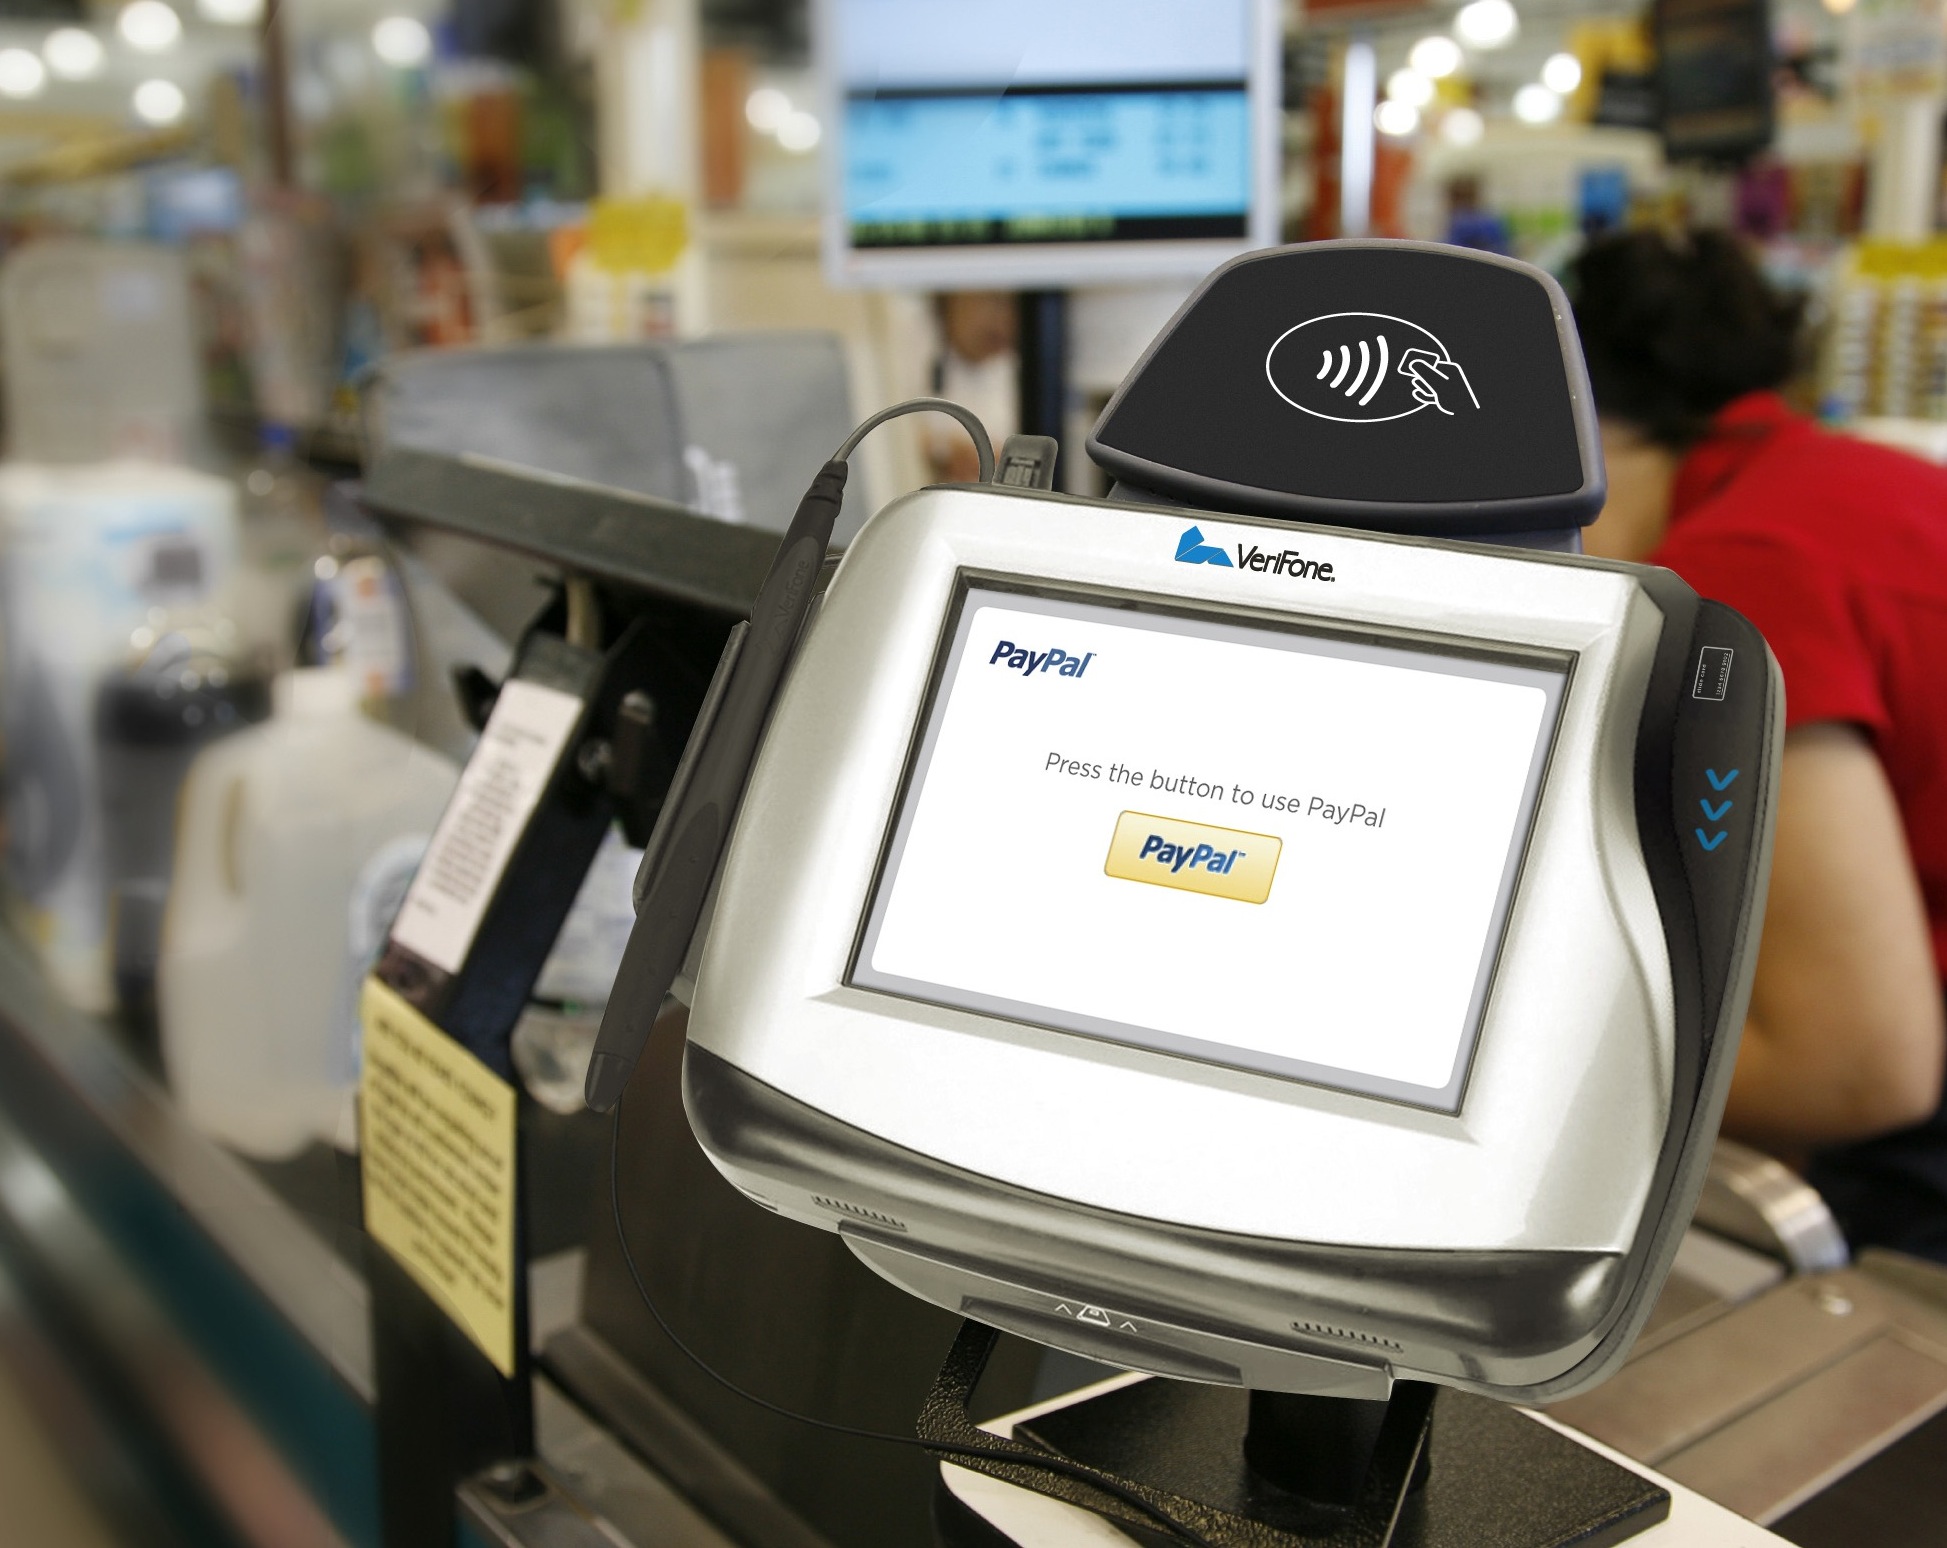 VeriFone Announces Deal with PayPal for POS Terminal Support; NFC Possible Later